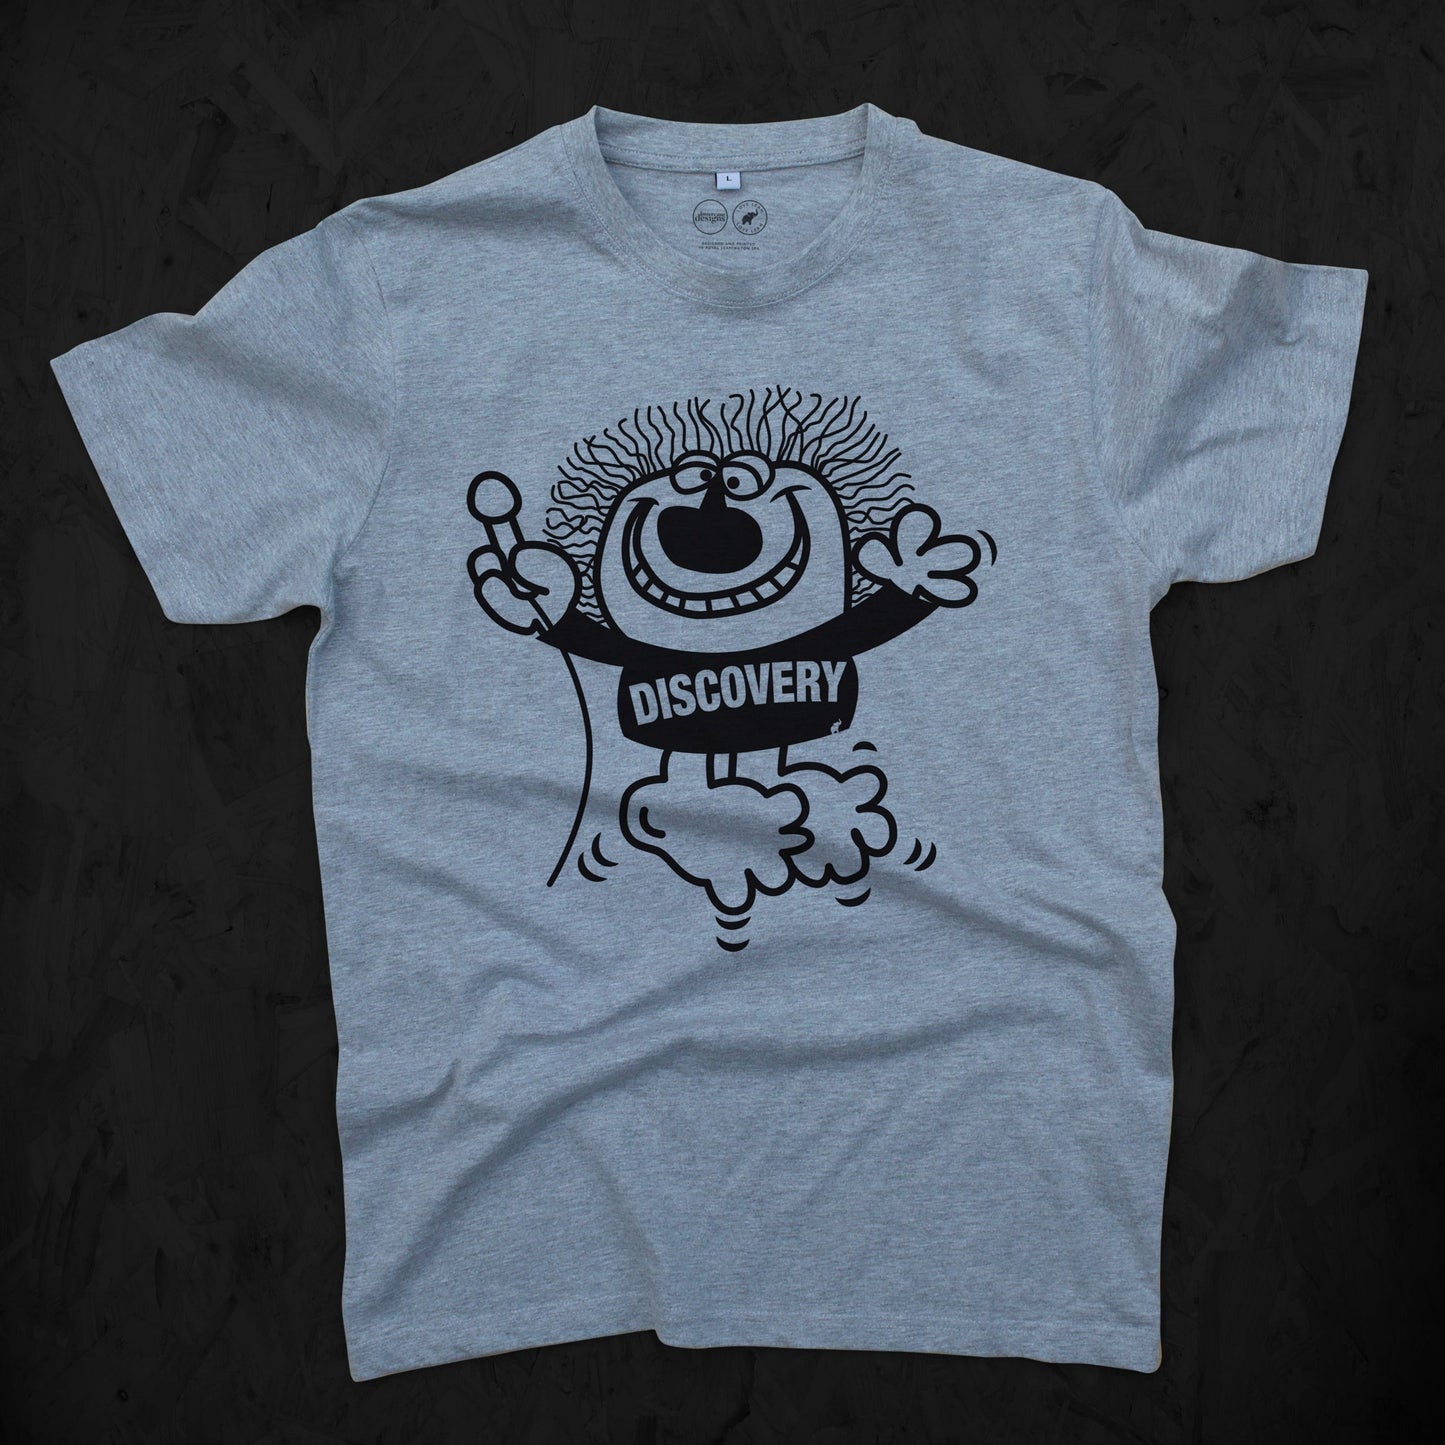 Discovery Tee Child's sizes 3-14 years